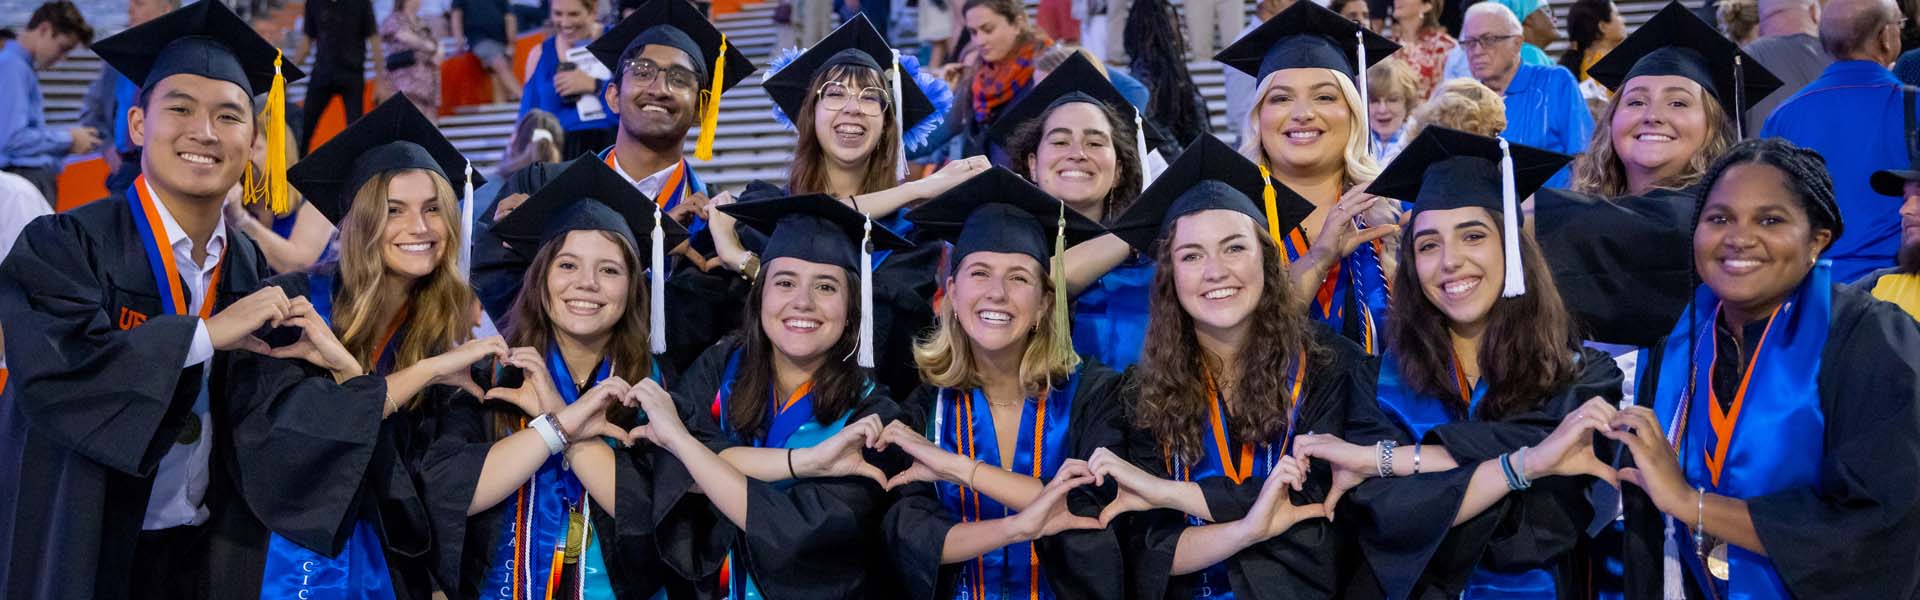 Graduating students forming hearts with their hands